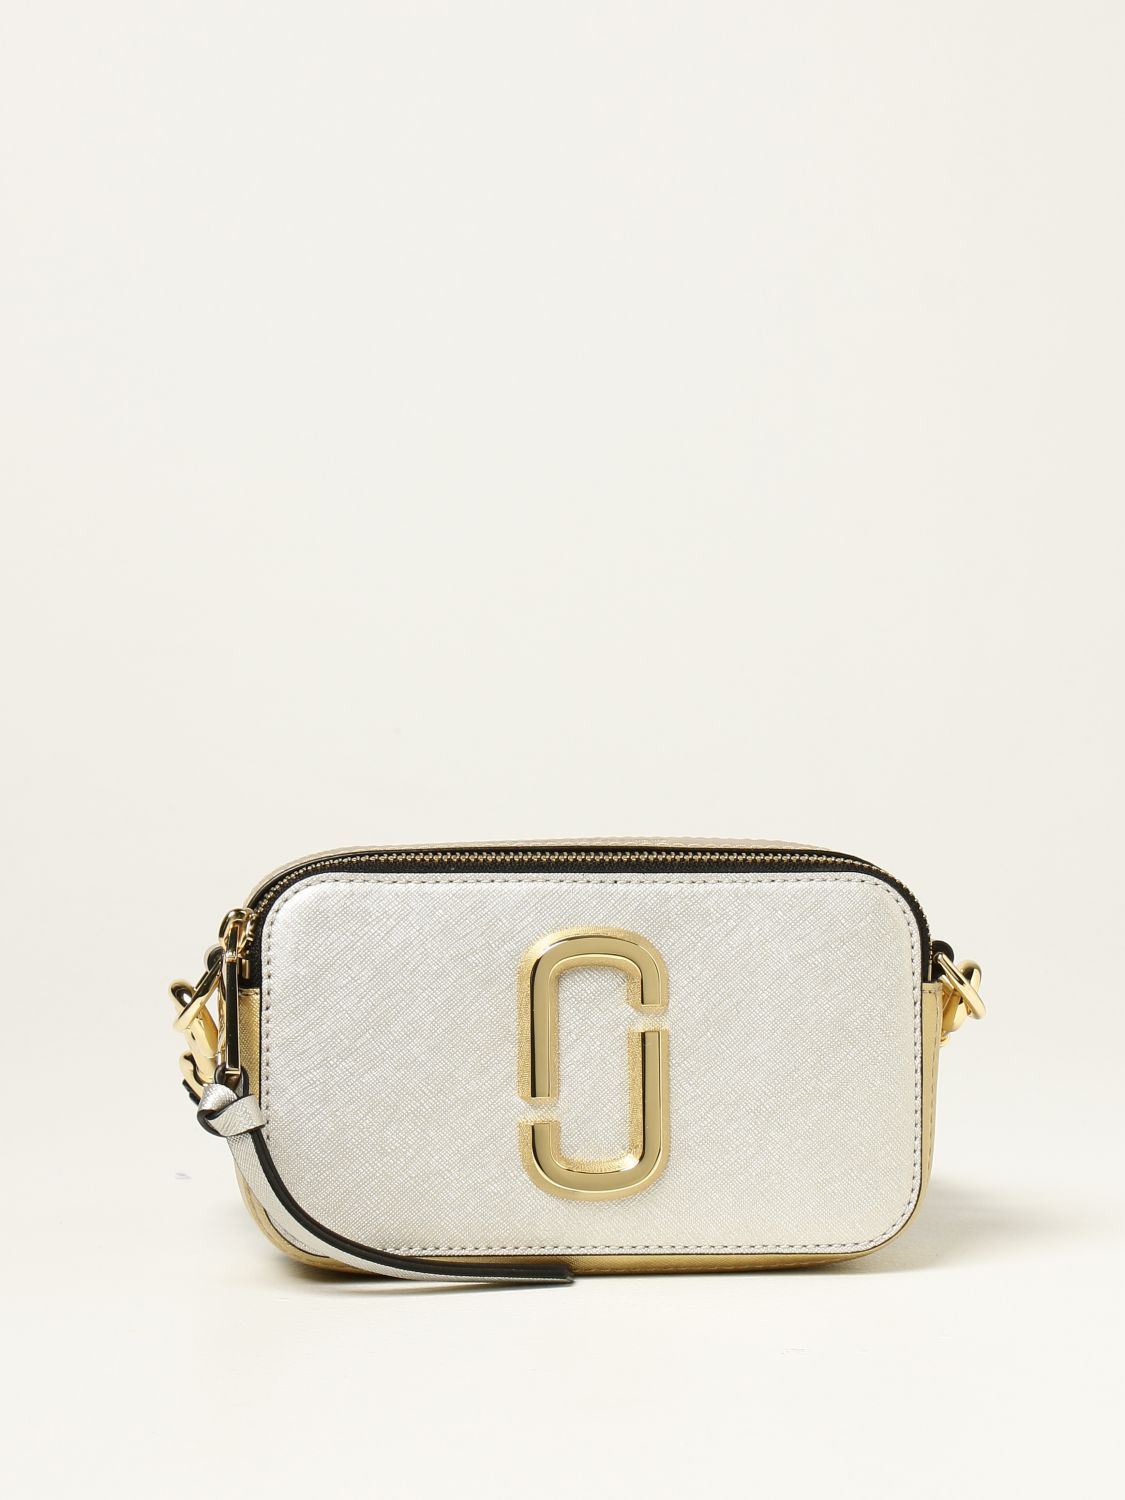 MARC JACOBS: The Snapshot bag in saffiano leather - Platinum  Marc Jacobs  crossbody bags H129L01PF21 online at